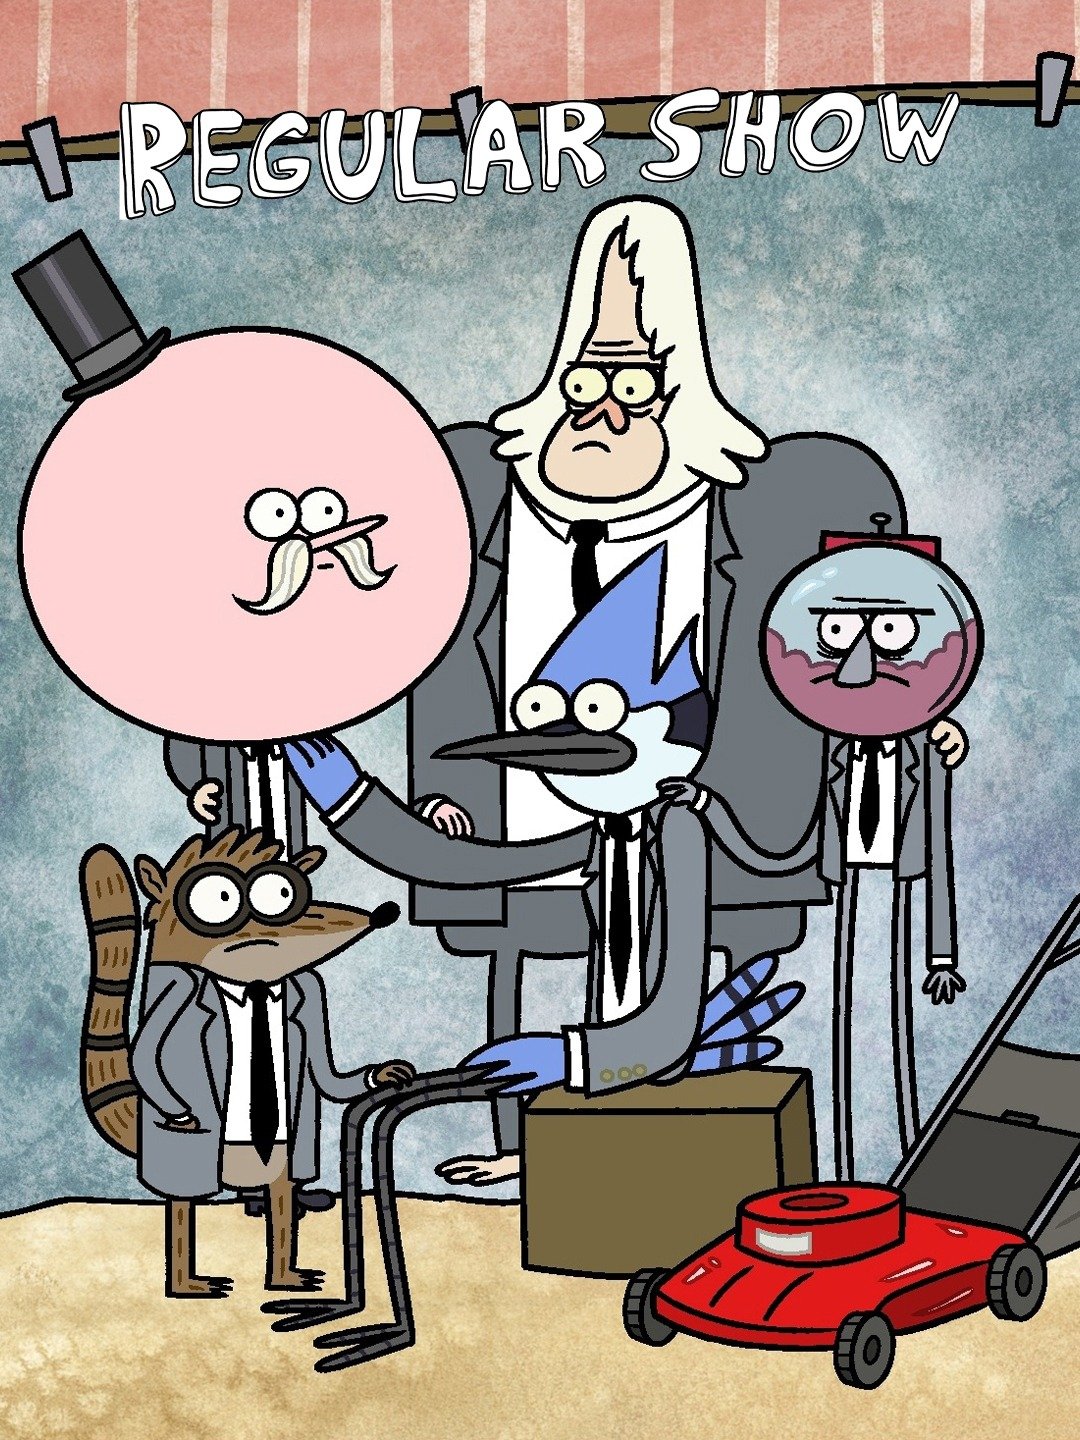 Regular Show S8E17 Mordeby and Rigbecai (Clip 3) [HD] - video Dailymotion